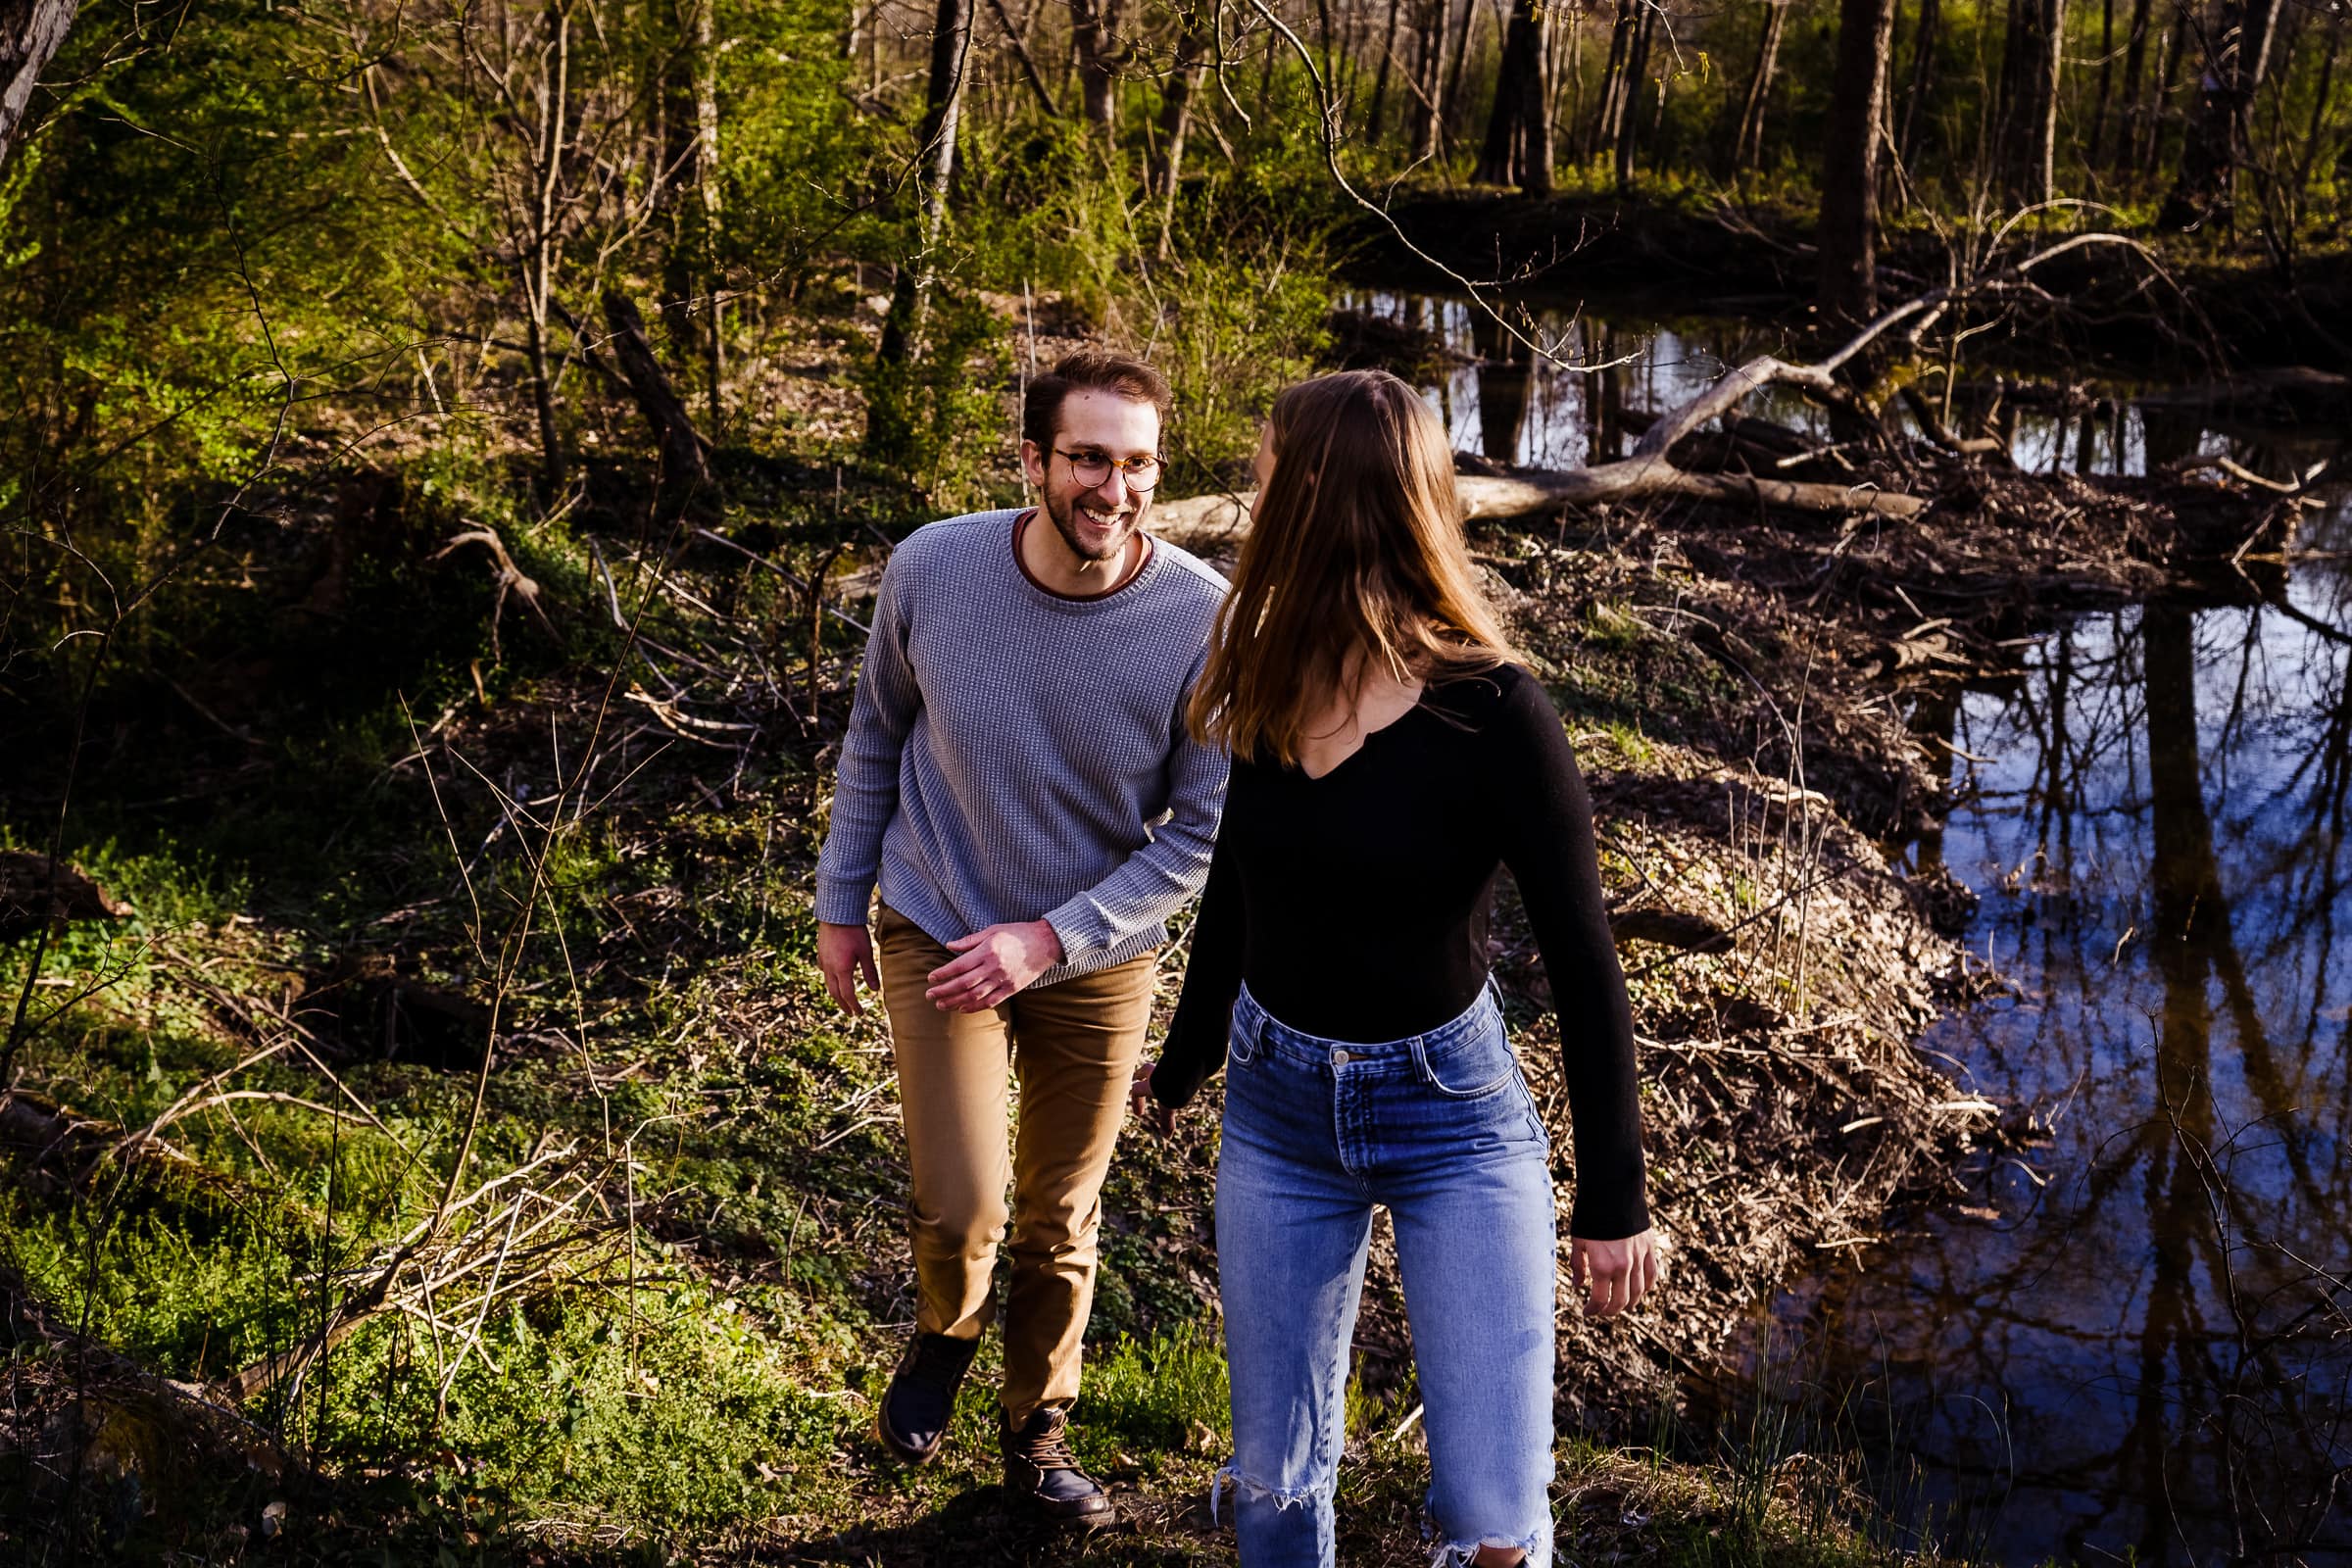 check out nearby nature parks for your engagement photos | photos by Kivus & Camera, Durham, NC wedding photographer